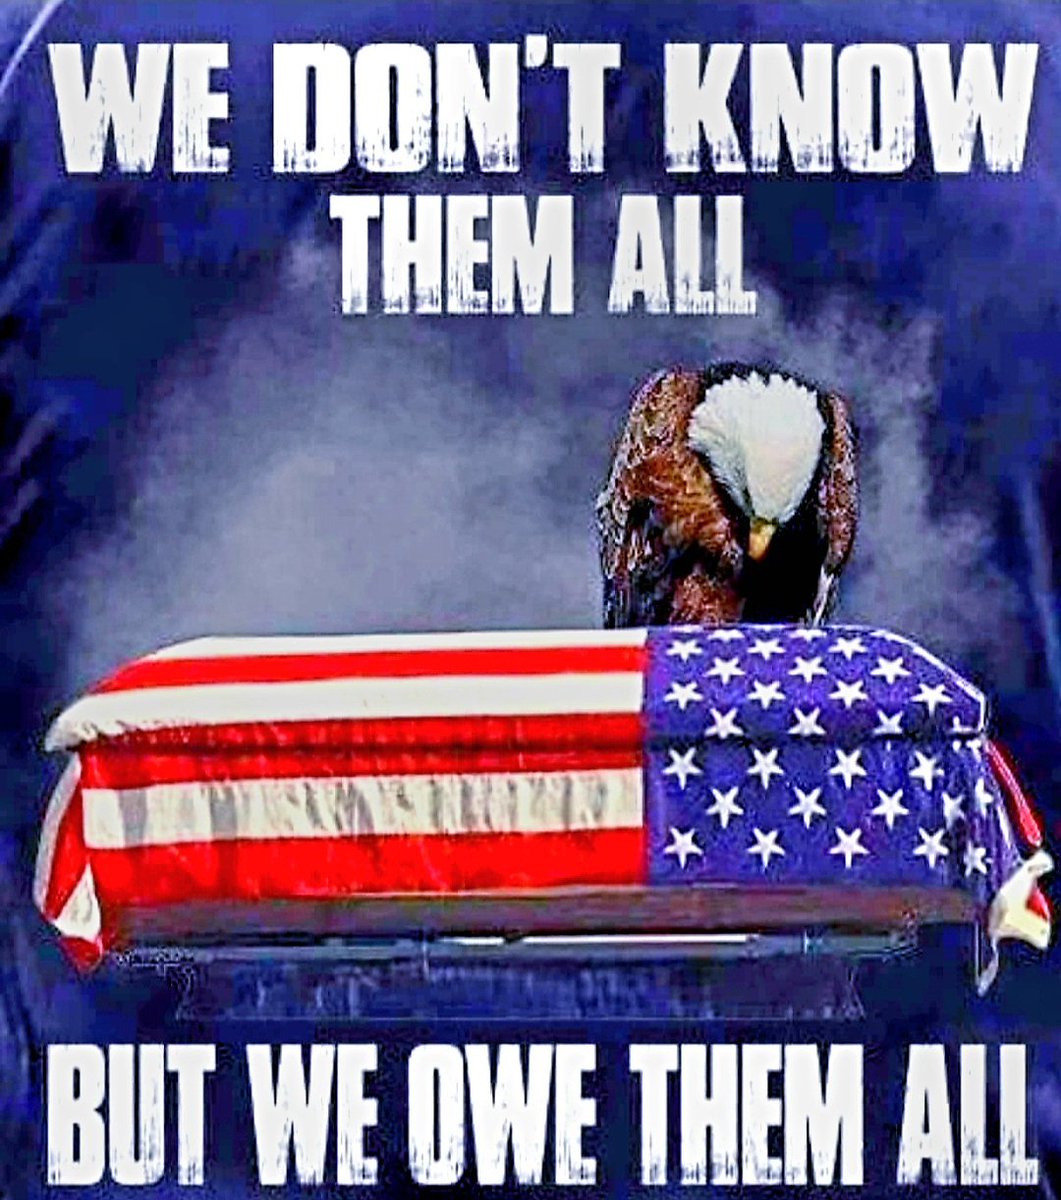 We don't know them all but we owe them all 👊🙏🇺🇸 ...